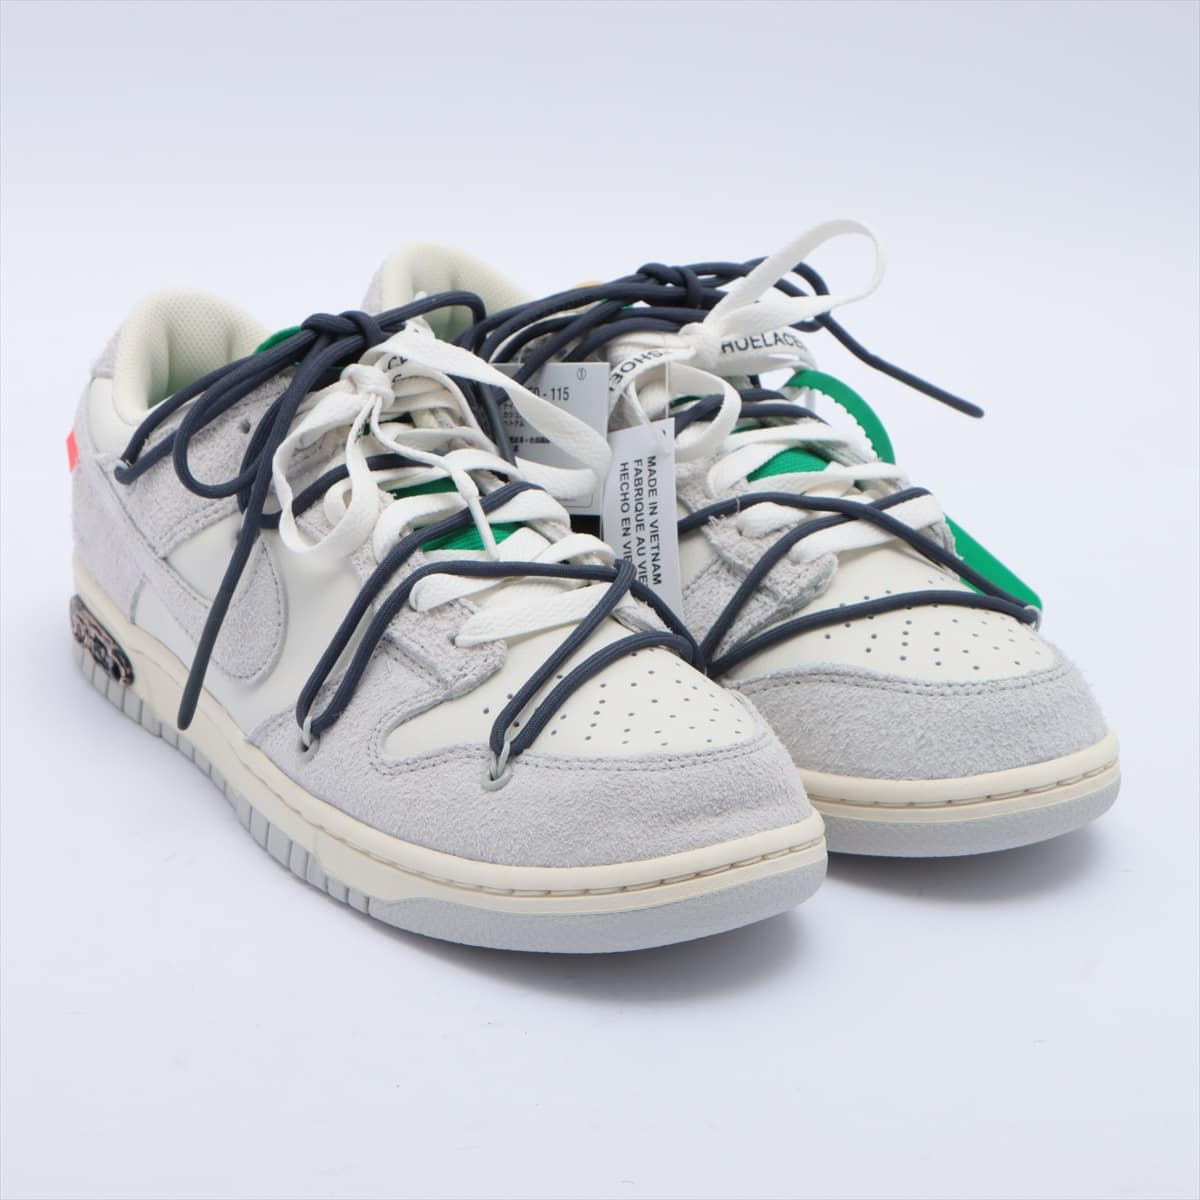 NIKE × OFF-WHITE Leather Sneakers 27.5cm Men's Gray x green Dunk Low The 50 Collection 1 of 50 